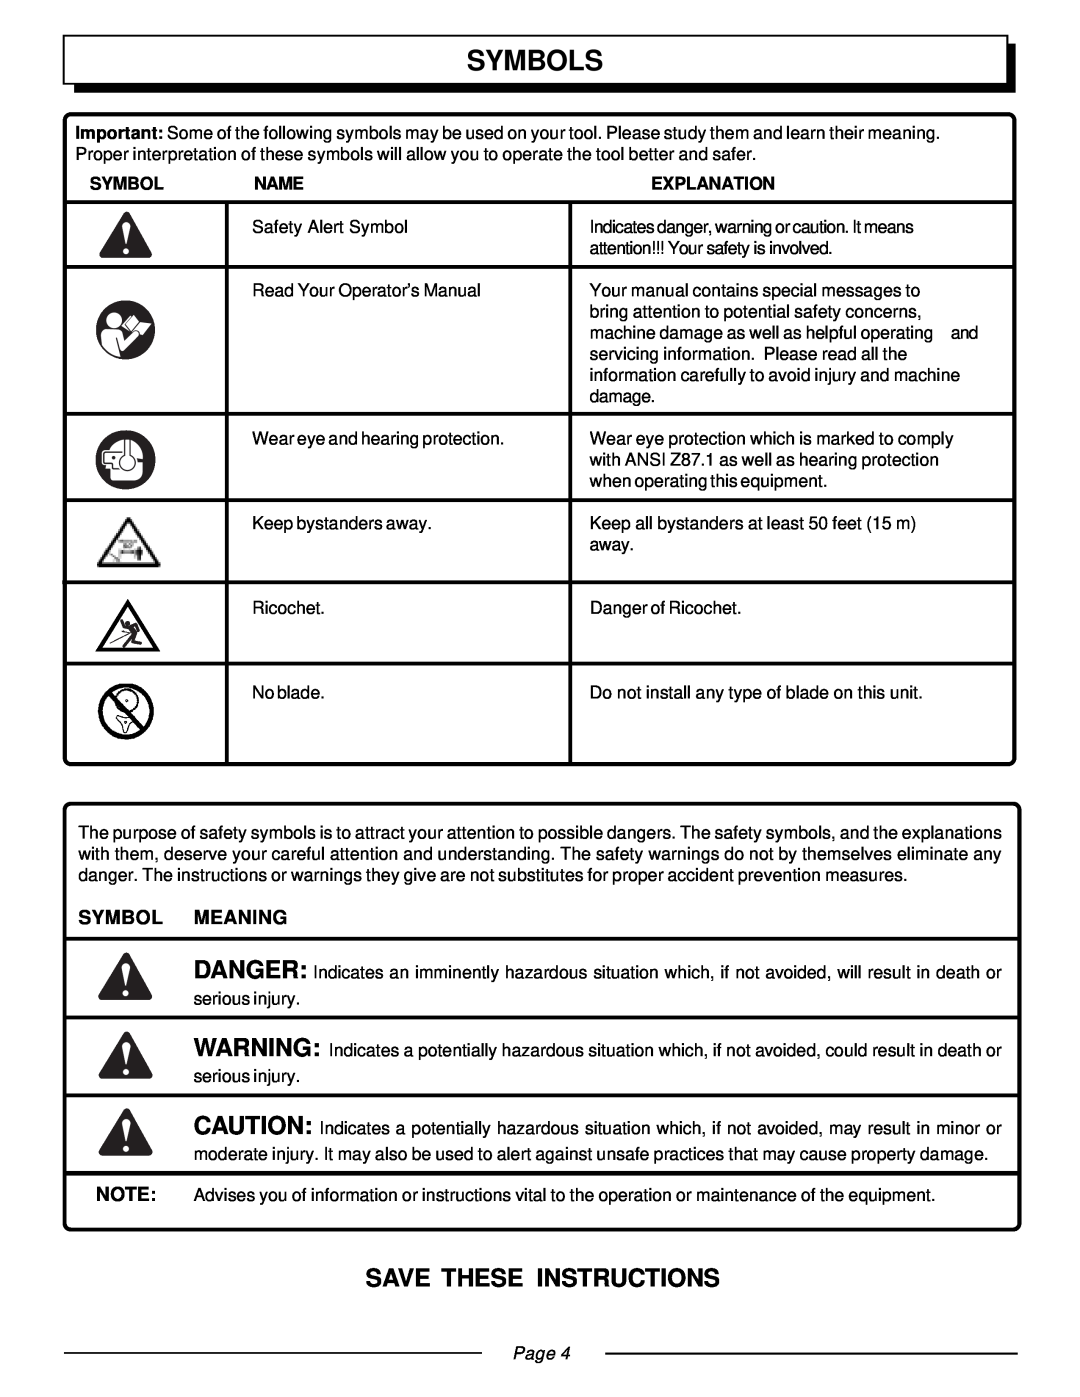 Homelite UT20818A manual Symbols, Save These Instructions, Symbol Meaning, Name, Explanation, Page 